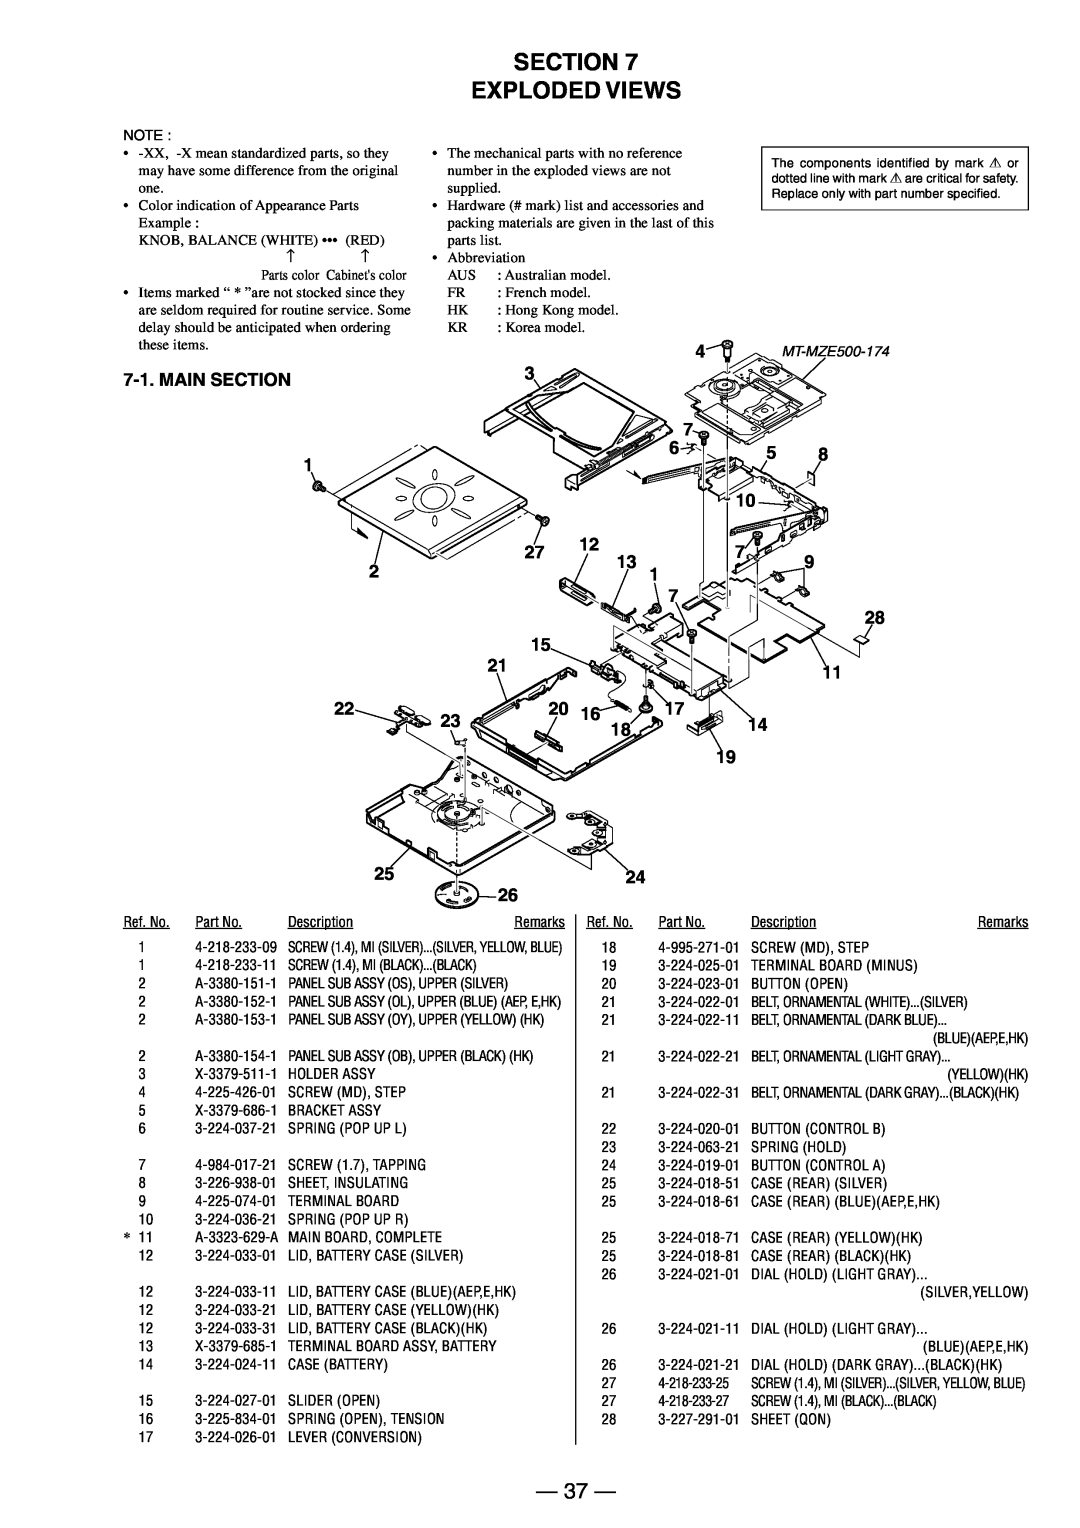 Sony MX-E500 specifications Section Exploded Views, Main Section 